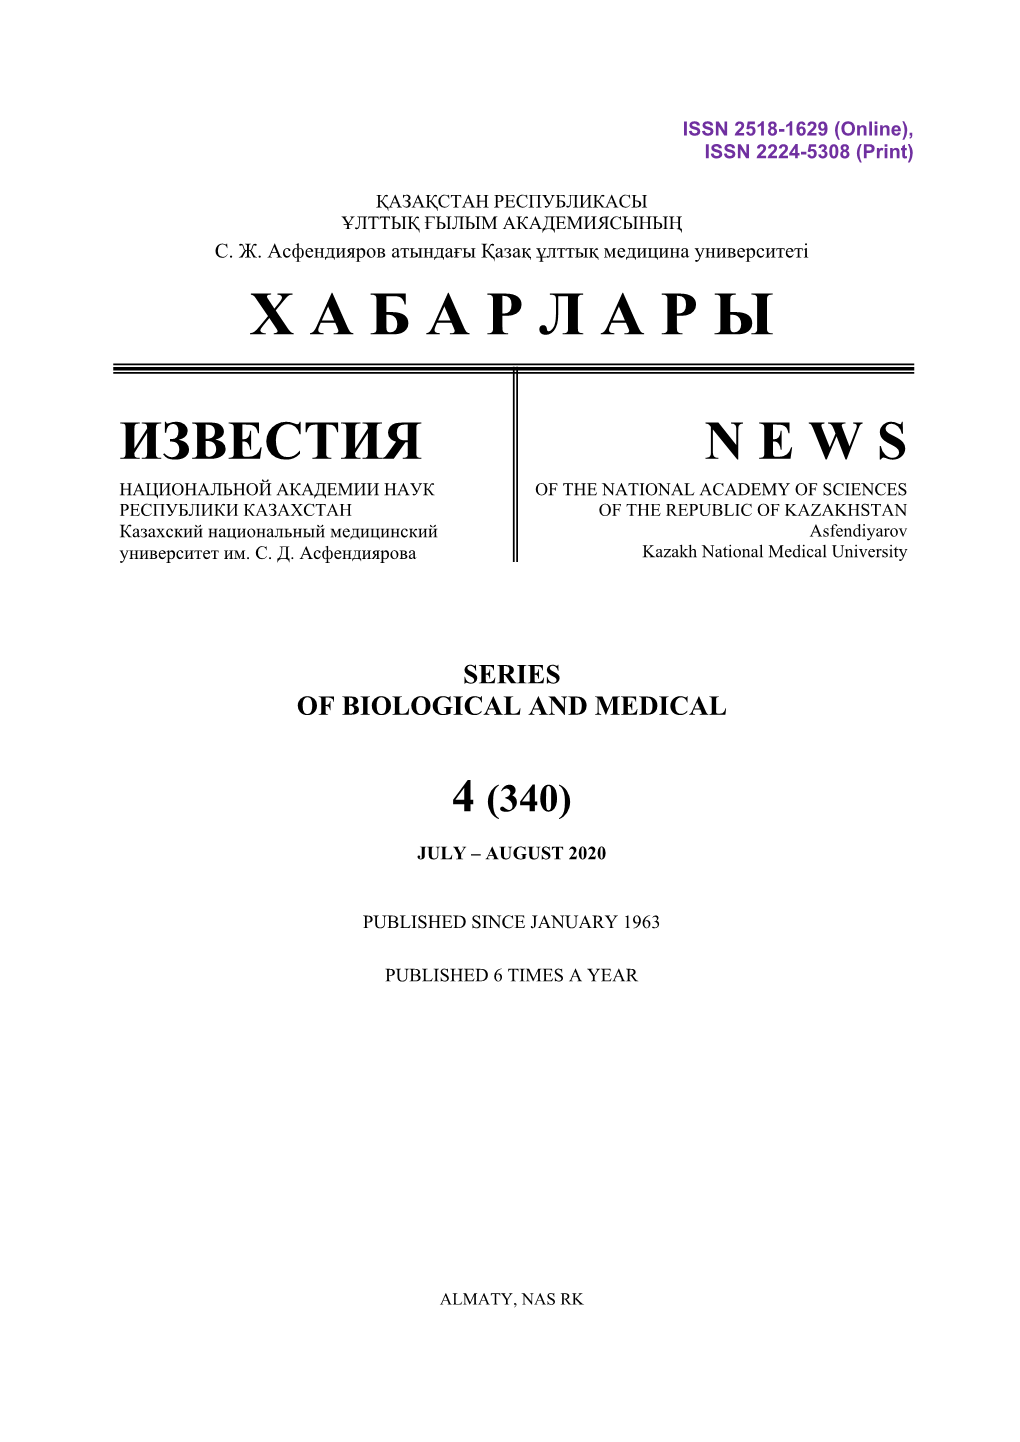 Series of Biological and Medical 4